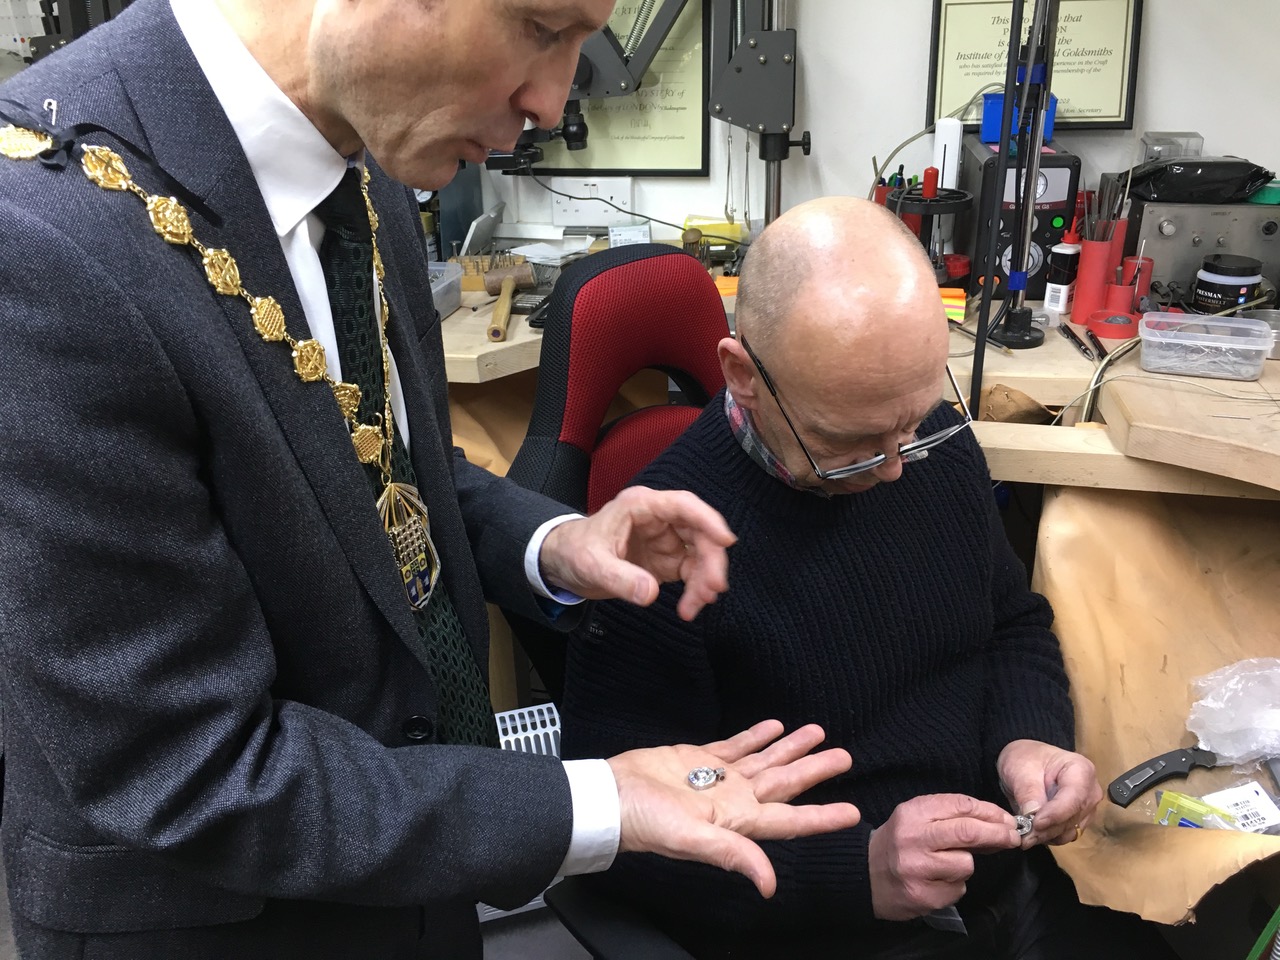 Councillor_Ian_Adams_and_Jeweller_Phil_Horton_take_a_closer_look_at_the_jewellery.jpeg